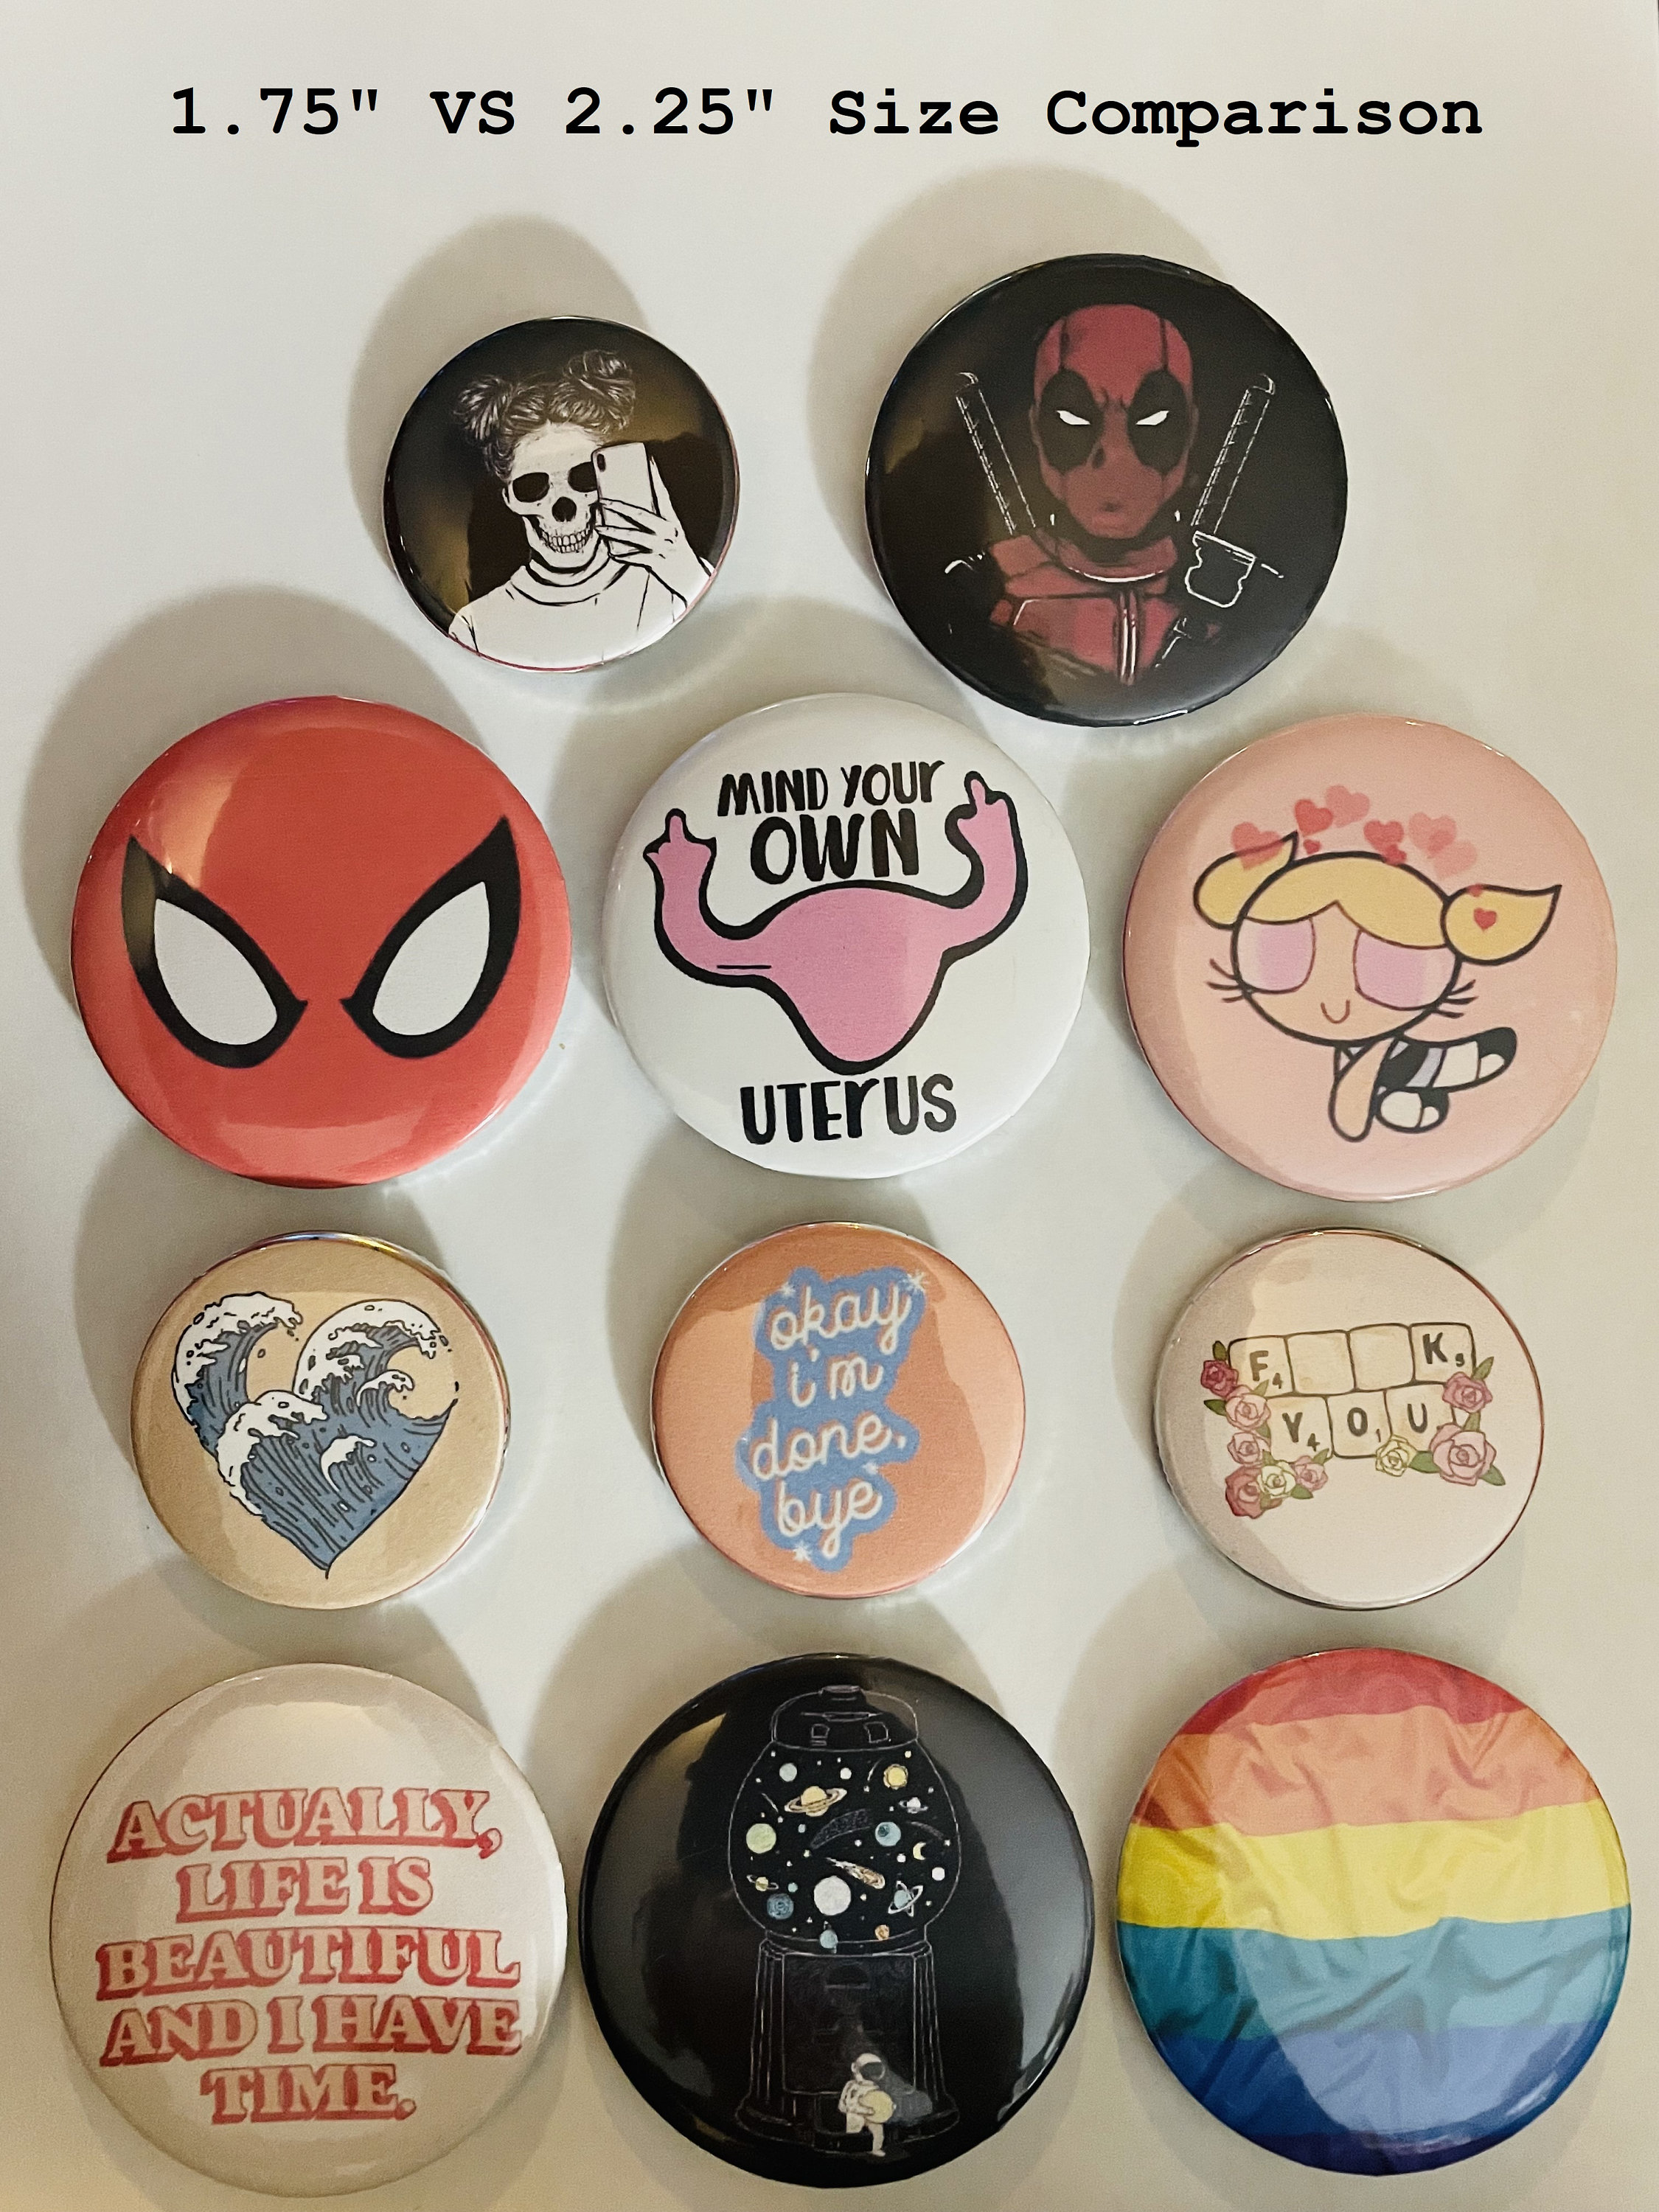 Inspirational button pins. Lot of 25. More than +100 designs. 1 inch  buttons A+